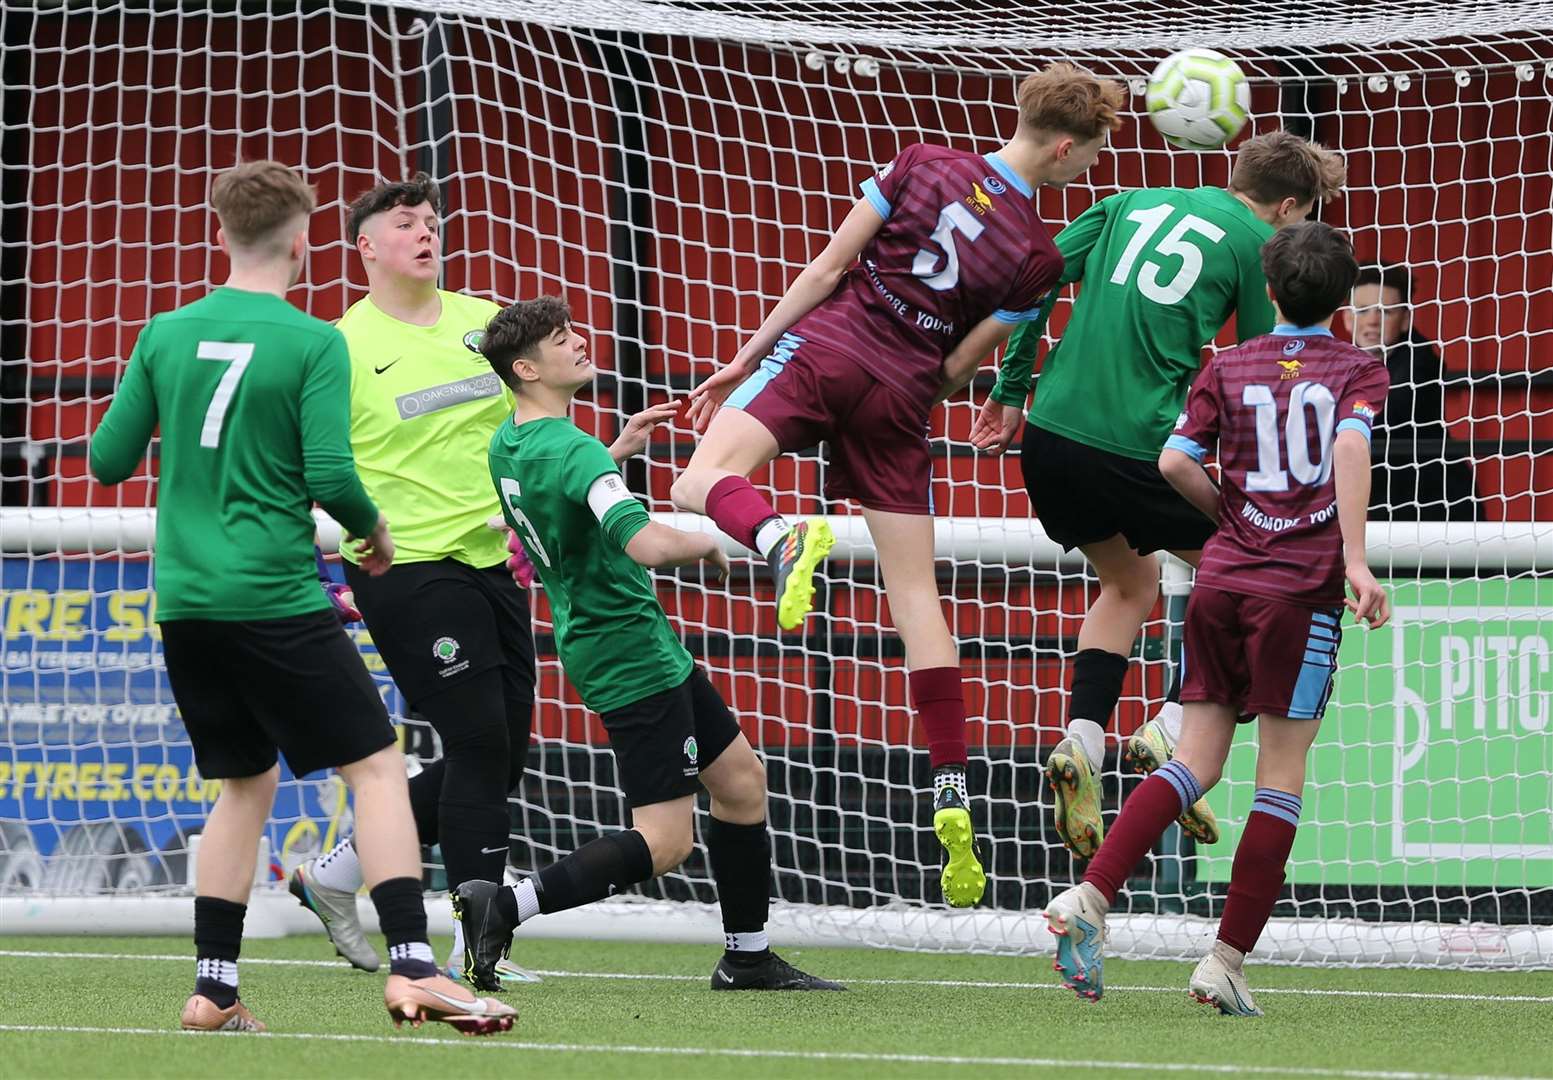 Wigmore Youth under-15s (claret) put Vinters Rangers under-15s under pressure in Sunday's final. Picture: PSP Images